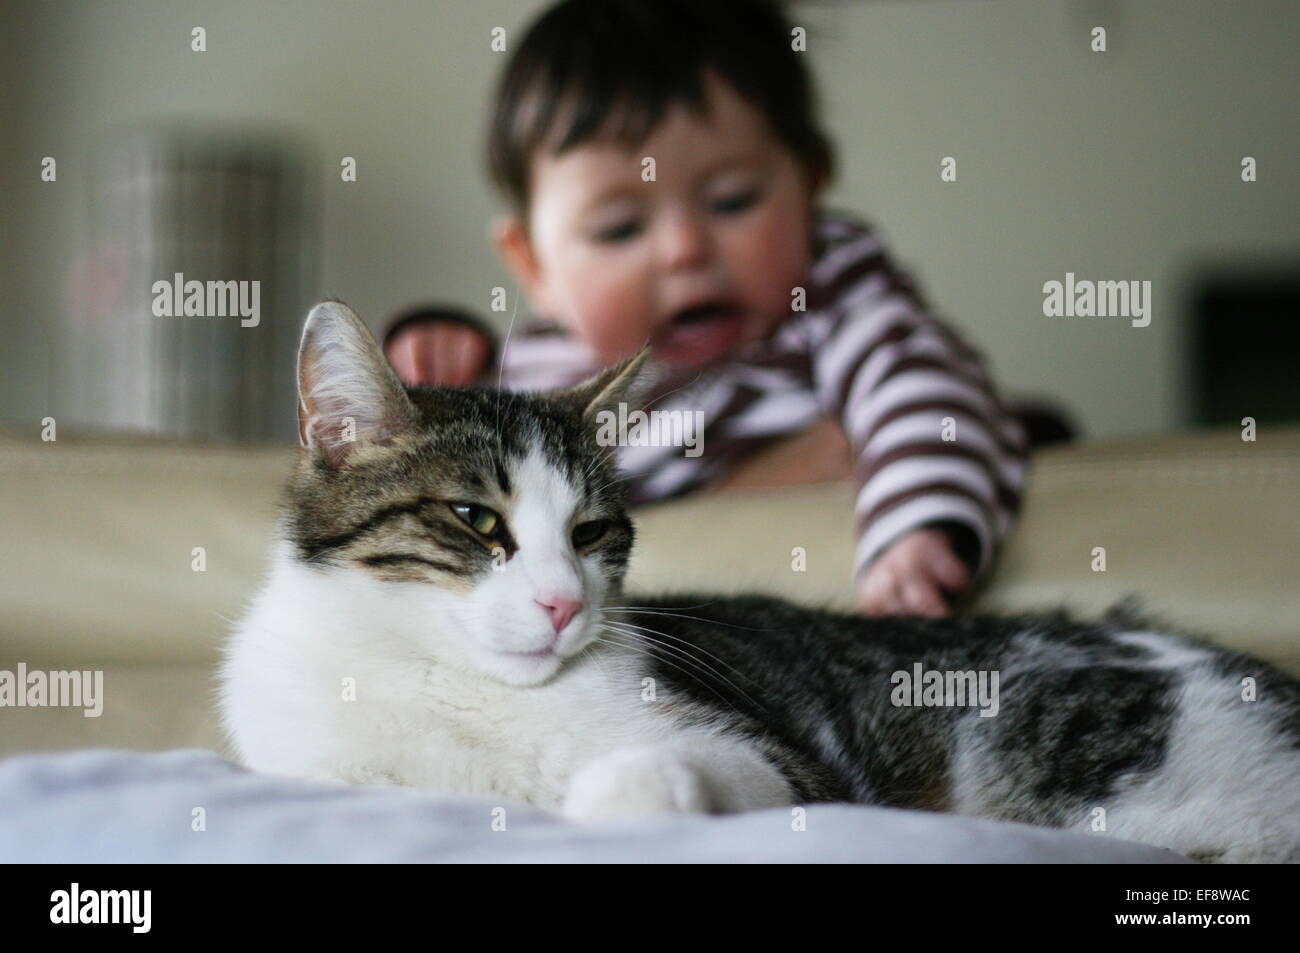 Baby boy playing with a cat's tail Stock Photo